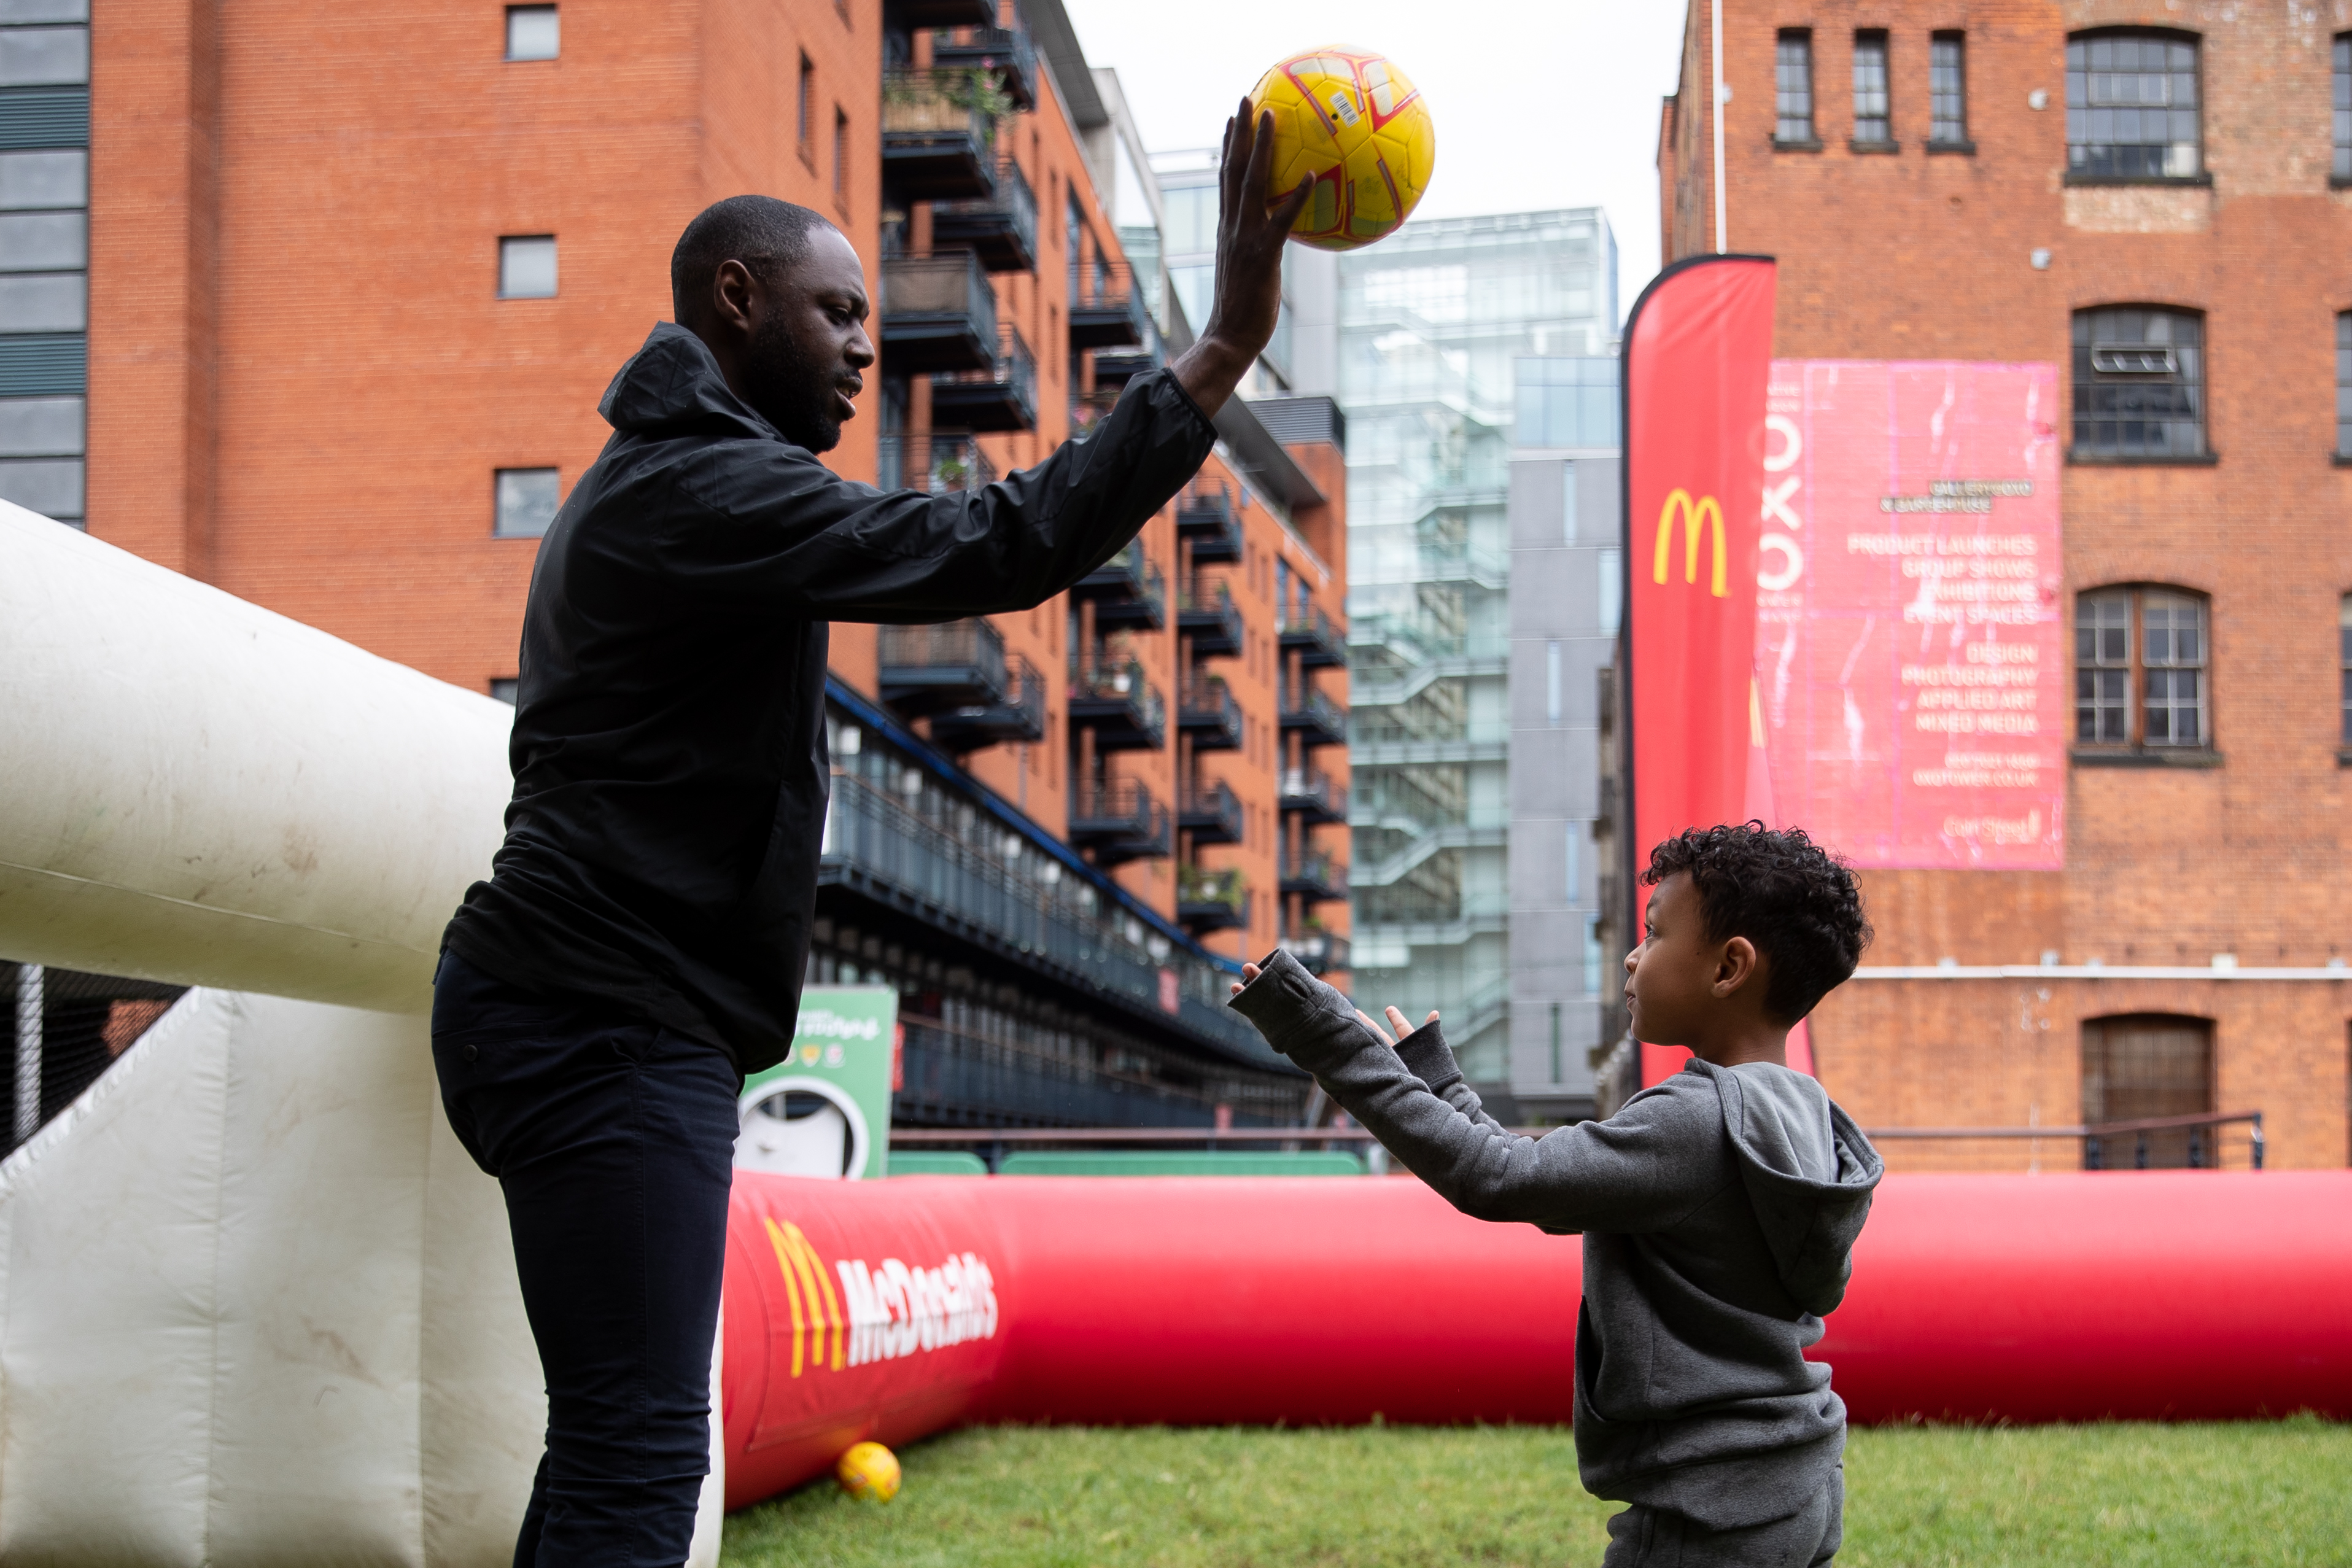 Ledley King attended a McDonald's Fun Football programme, which is a joint initiative with the FA to give kids aged 5-11 free access to football